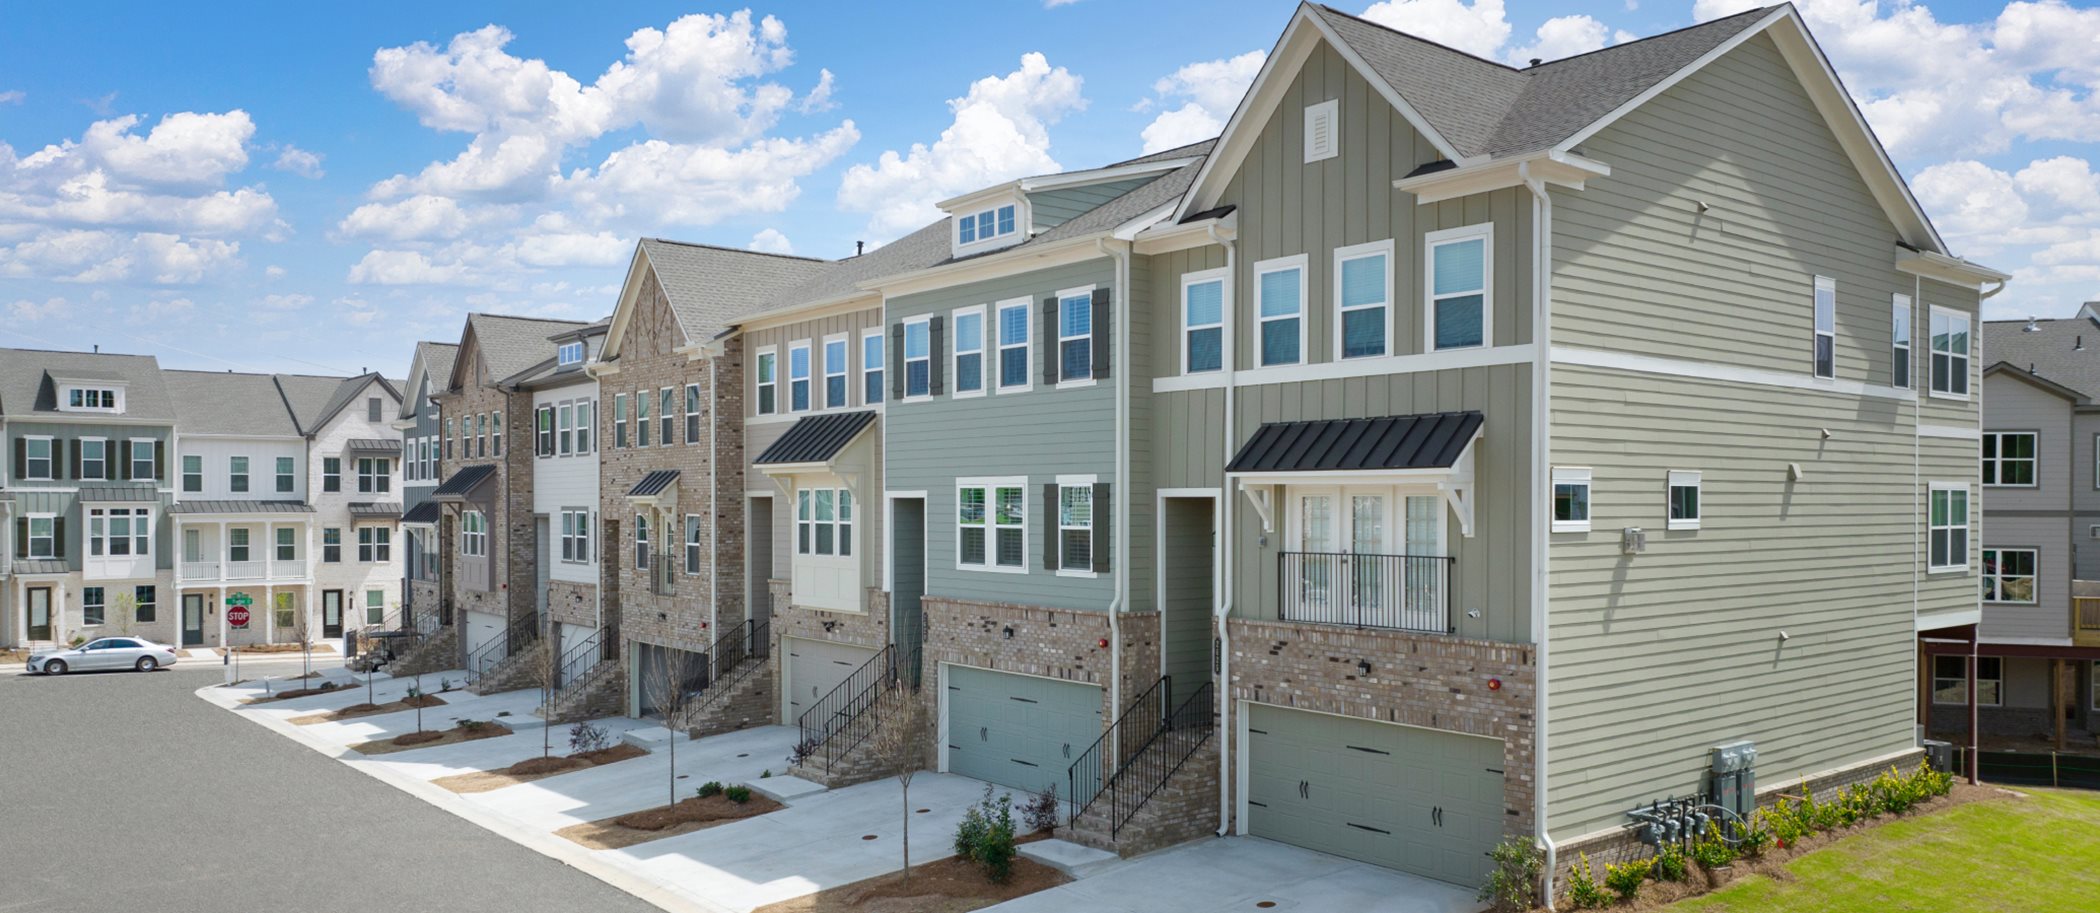 Cumberland Station Townhome Exterior Streetscape